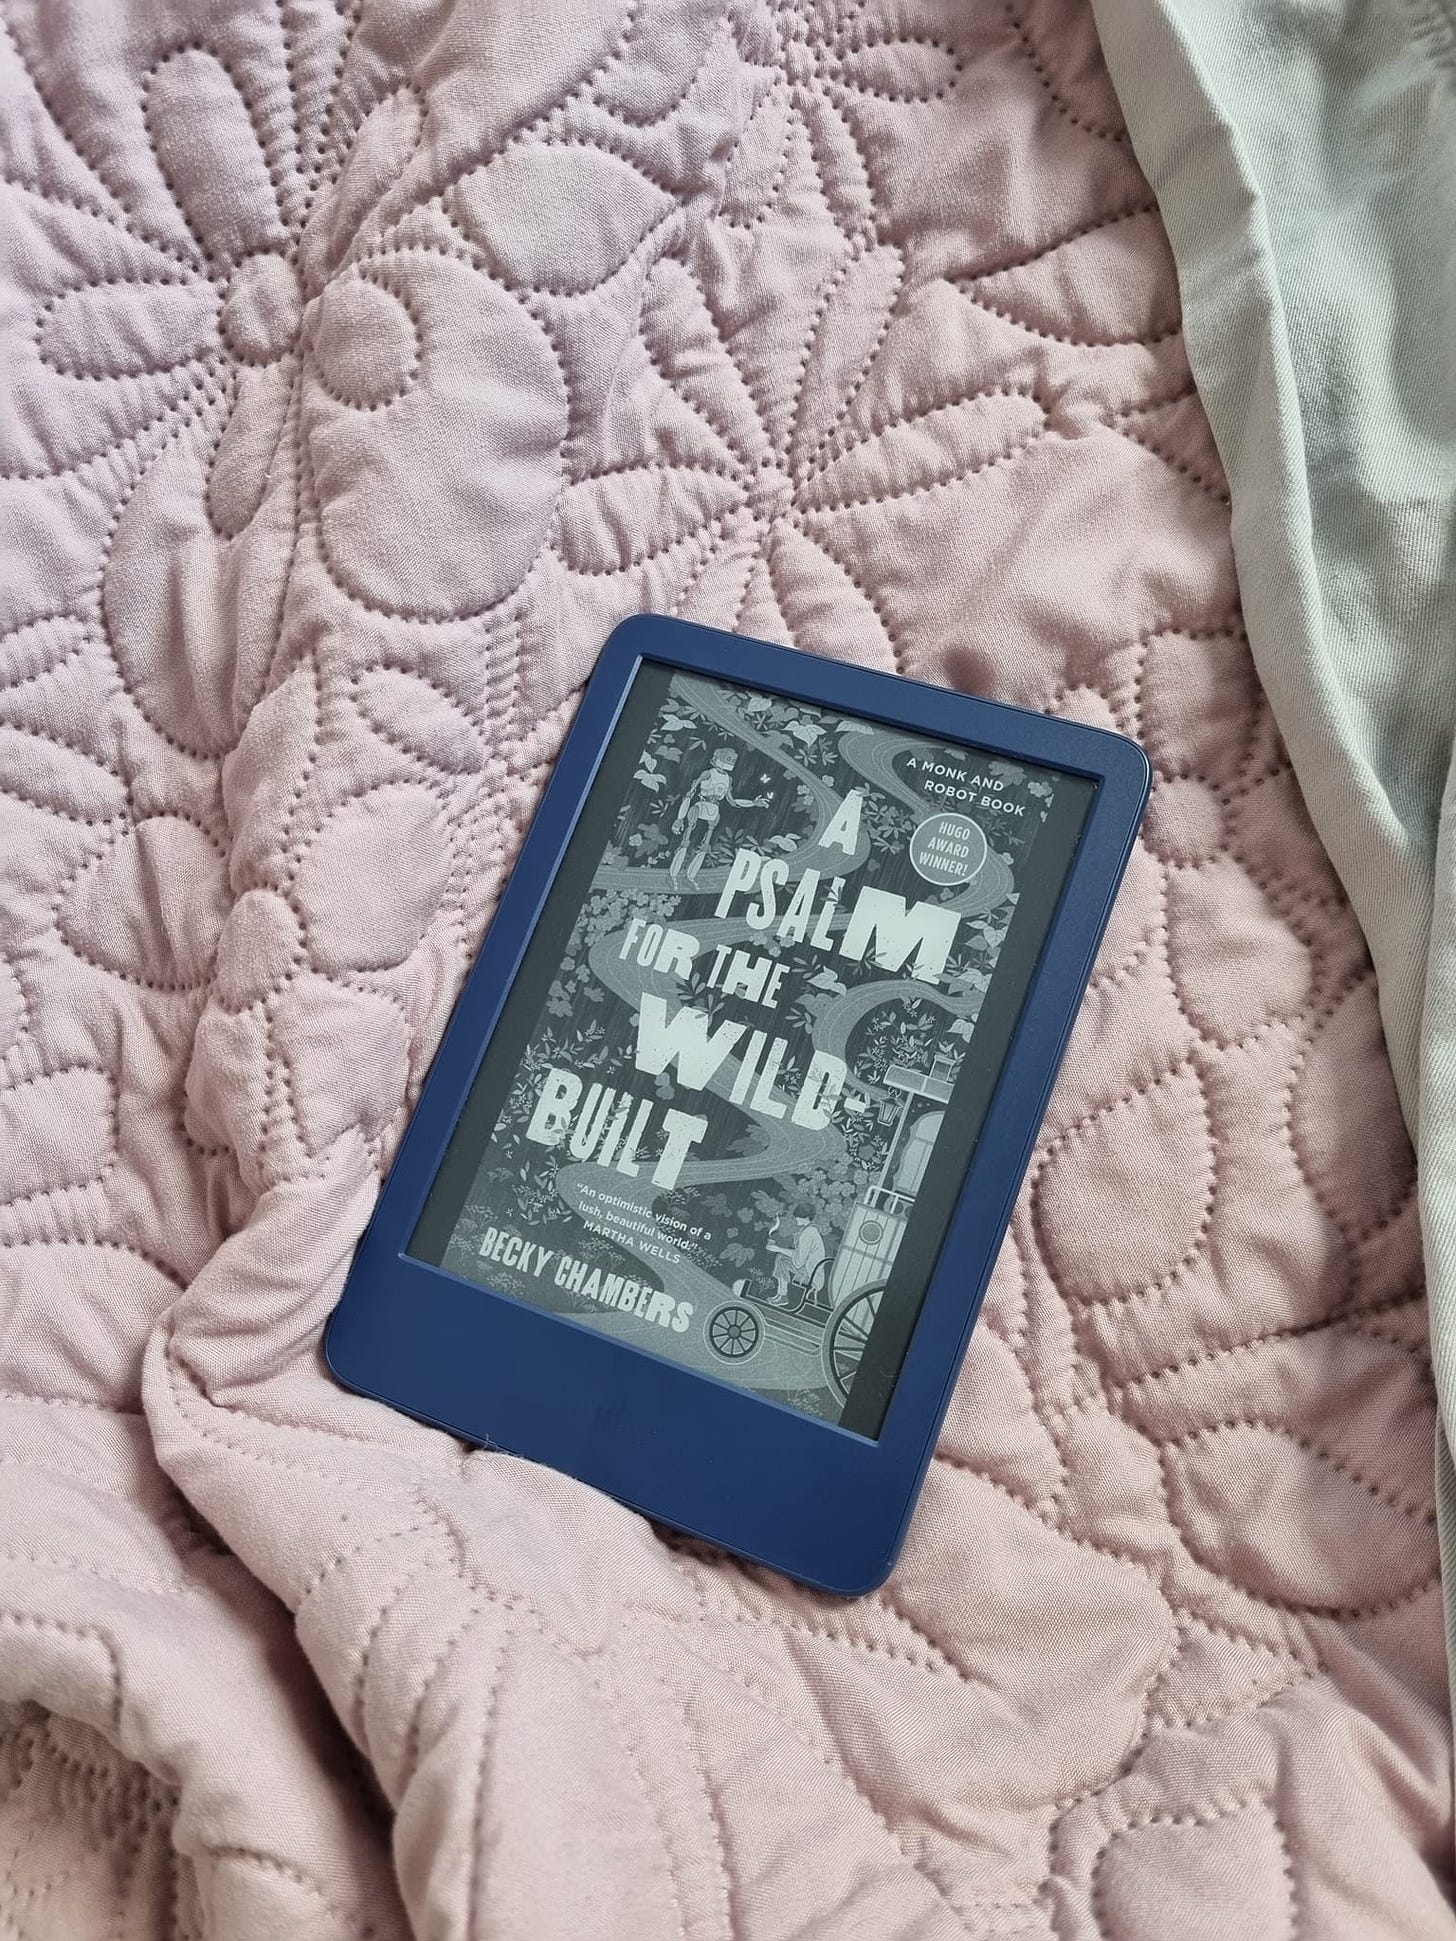 A Kindle lying on a pink bedspread showing the cover of A Psalm for the Wild-Built by Becky Chambers